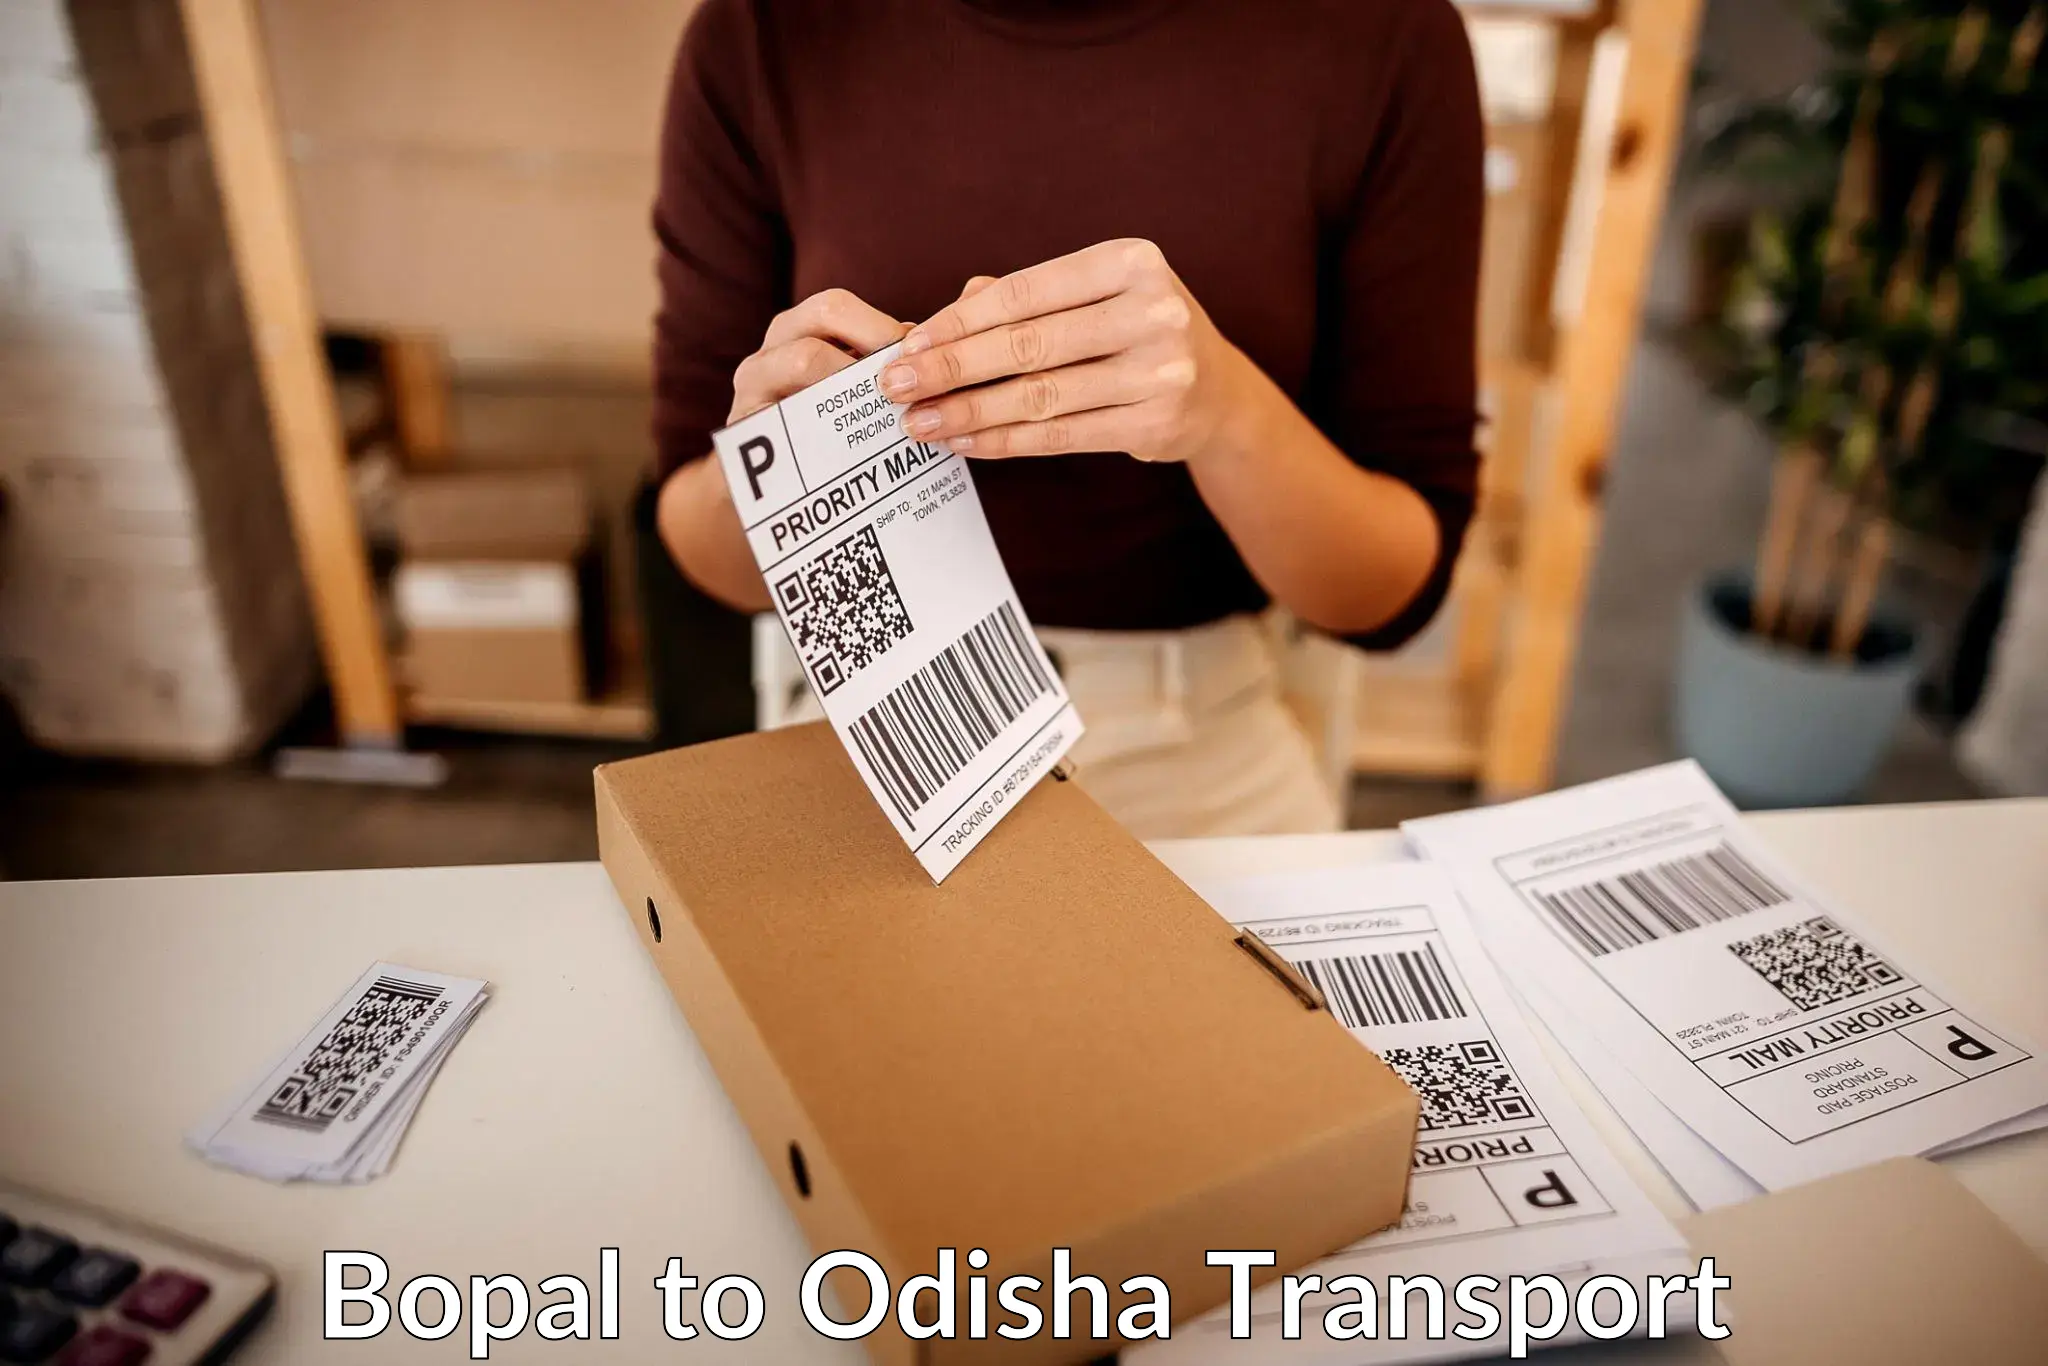 Transport in sharing in Bopal to Odisha